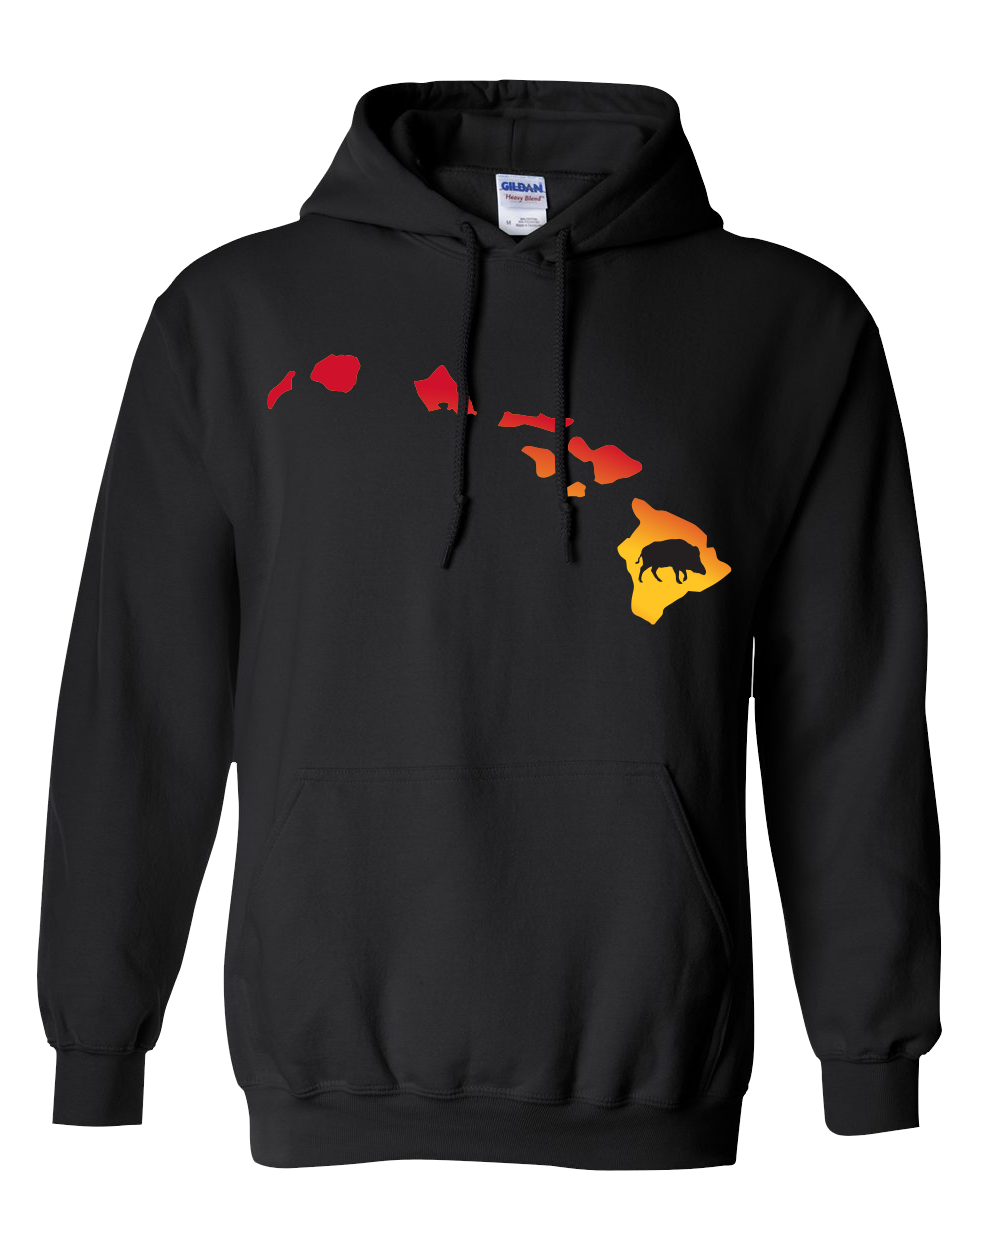 Pullover Hooded Sweatshirt Hawaii Black Wild Hog Vibrant Design High Quality Tight Knit Ring Spun Low Maintenance Cotton Printed With The Newest Available Color Transfer Technology